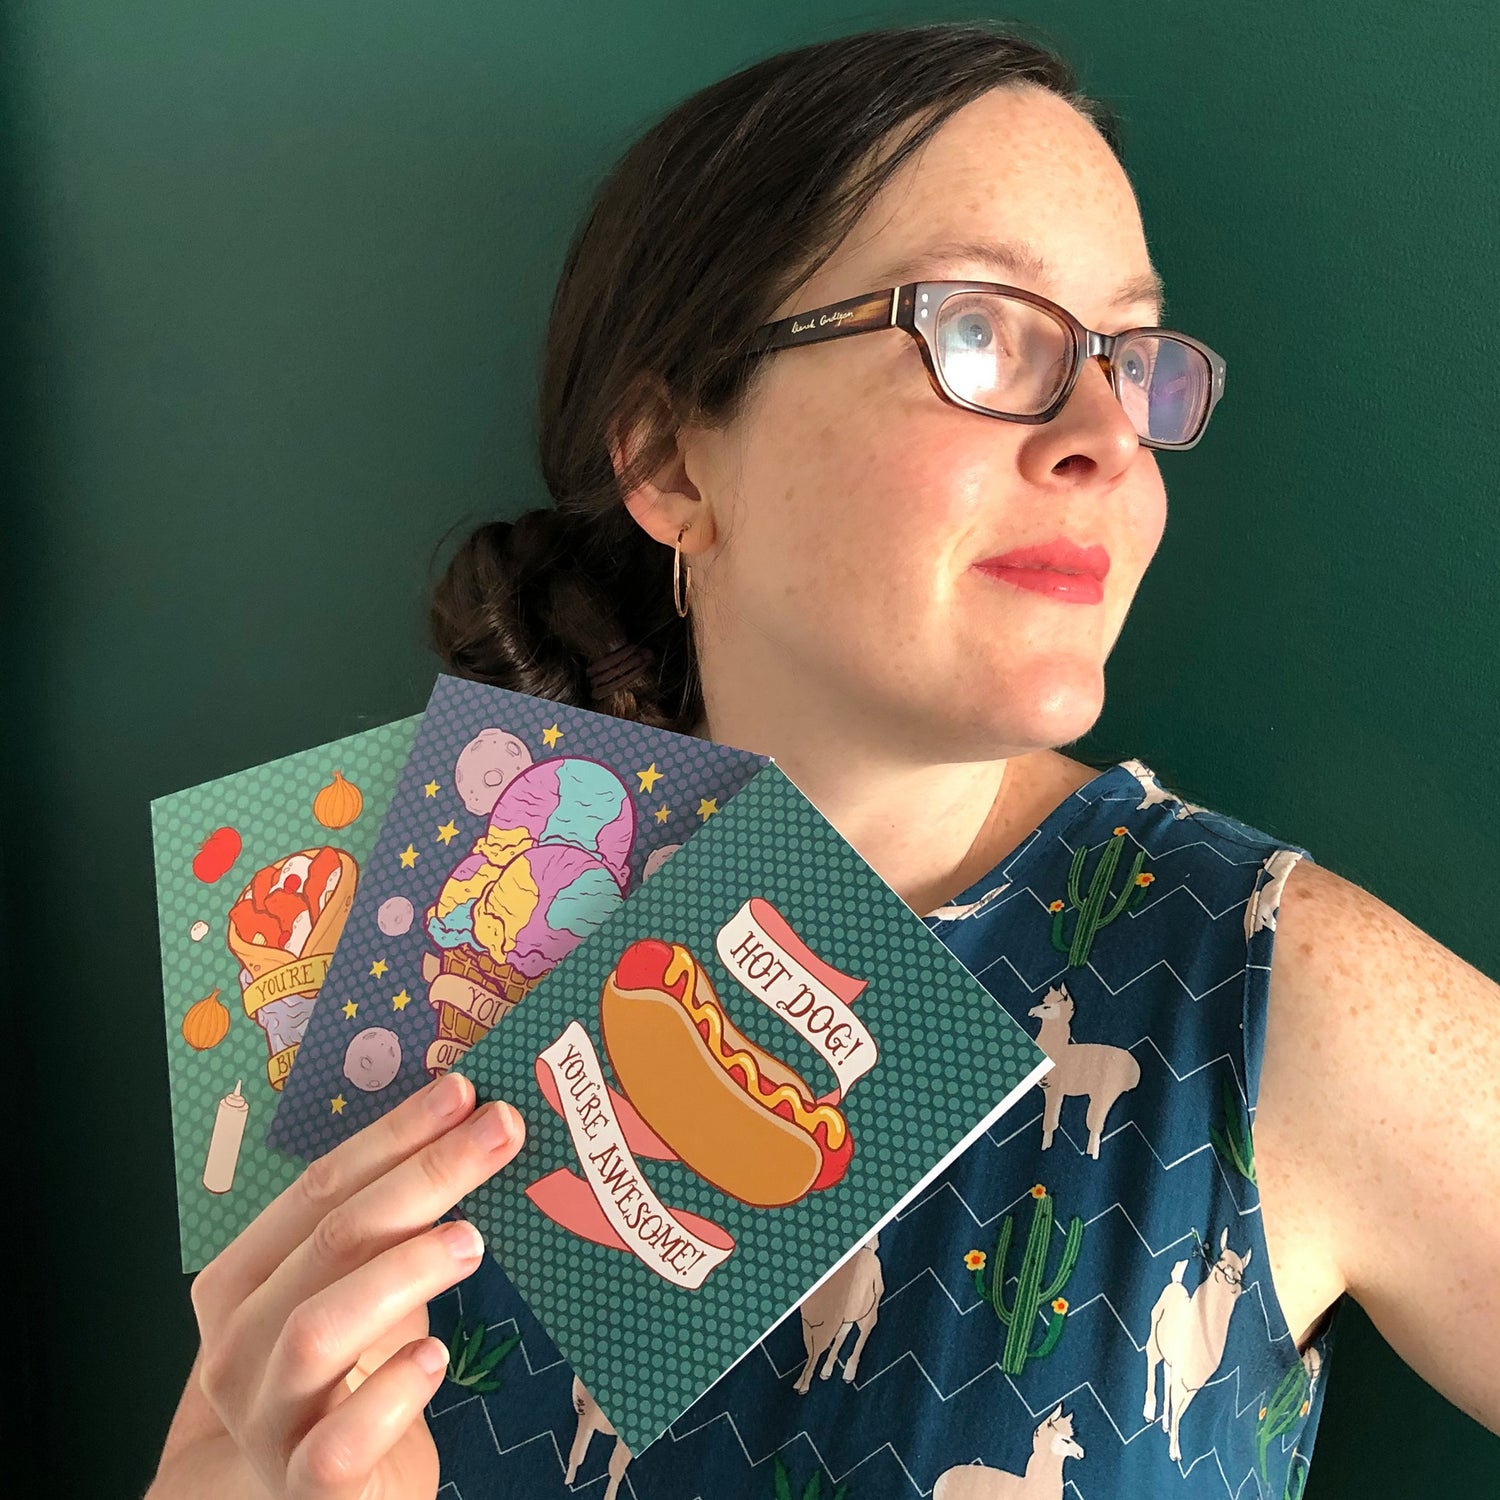 A white woman with dark hair and glasses holds 3 greeting cards. She stands against a dark green wall.